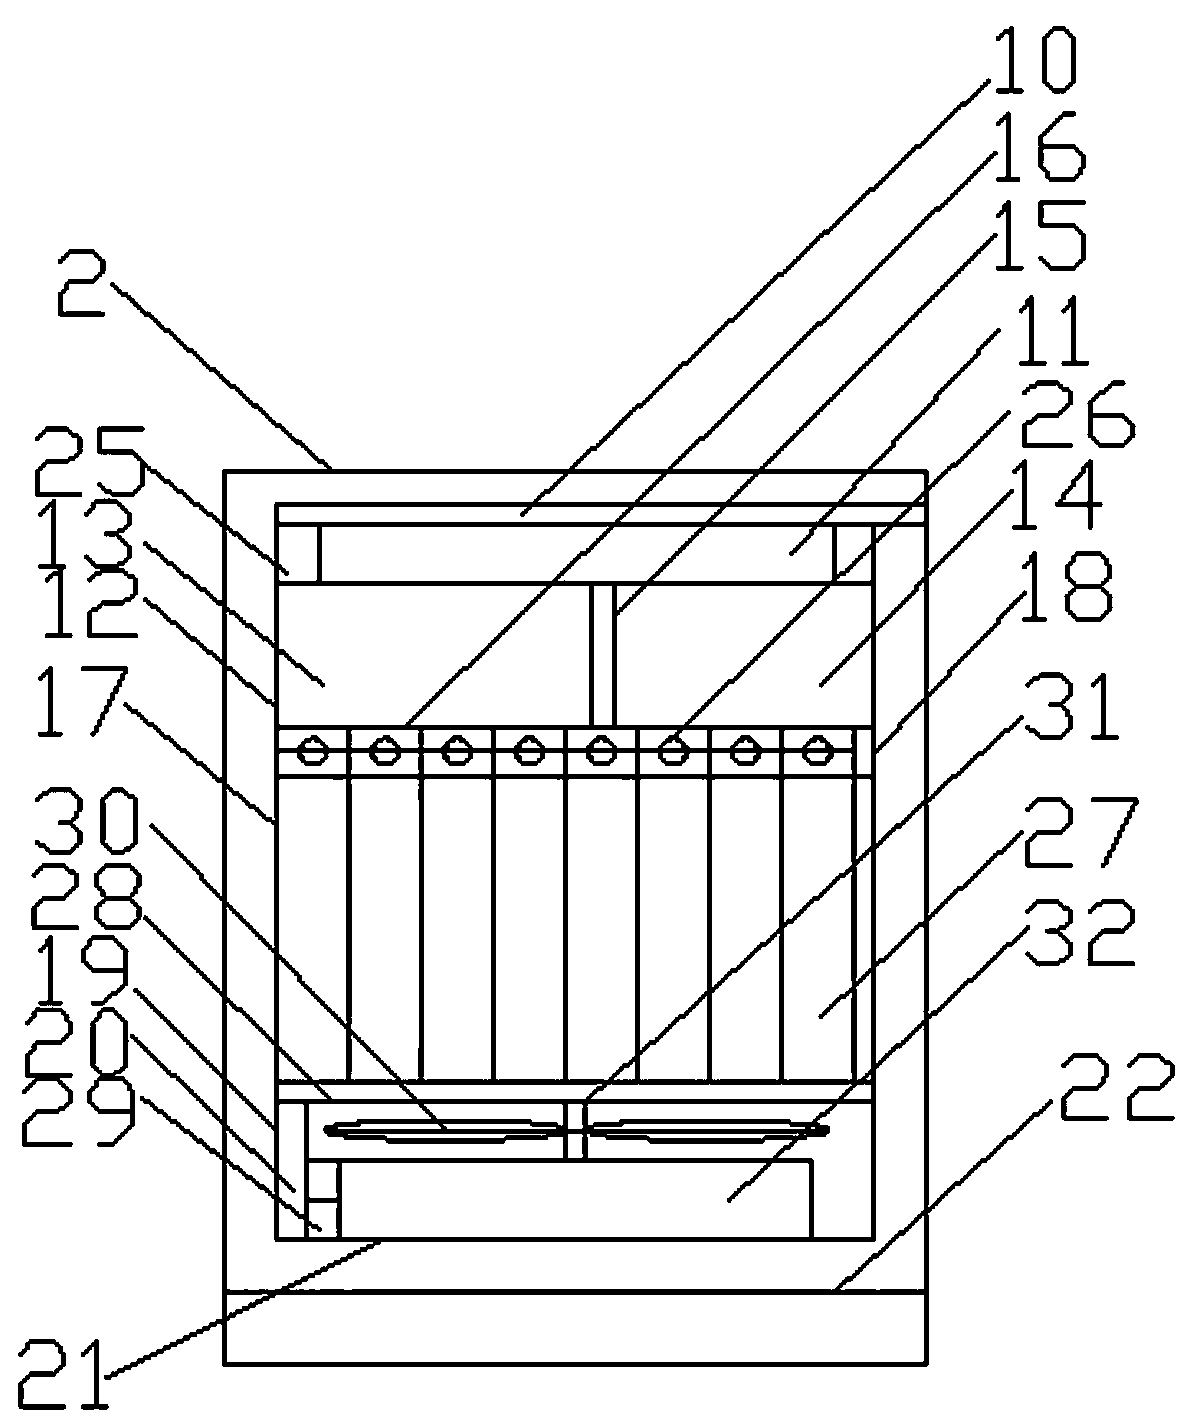 Distribution box shell capable of monitoring in-box circuit